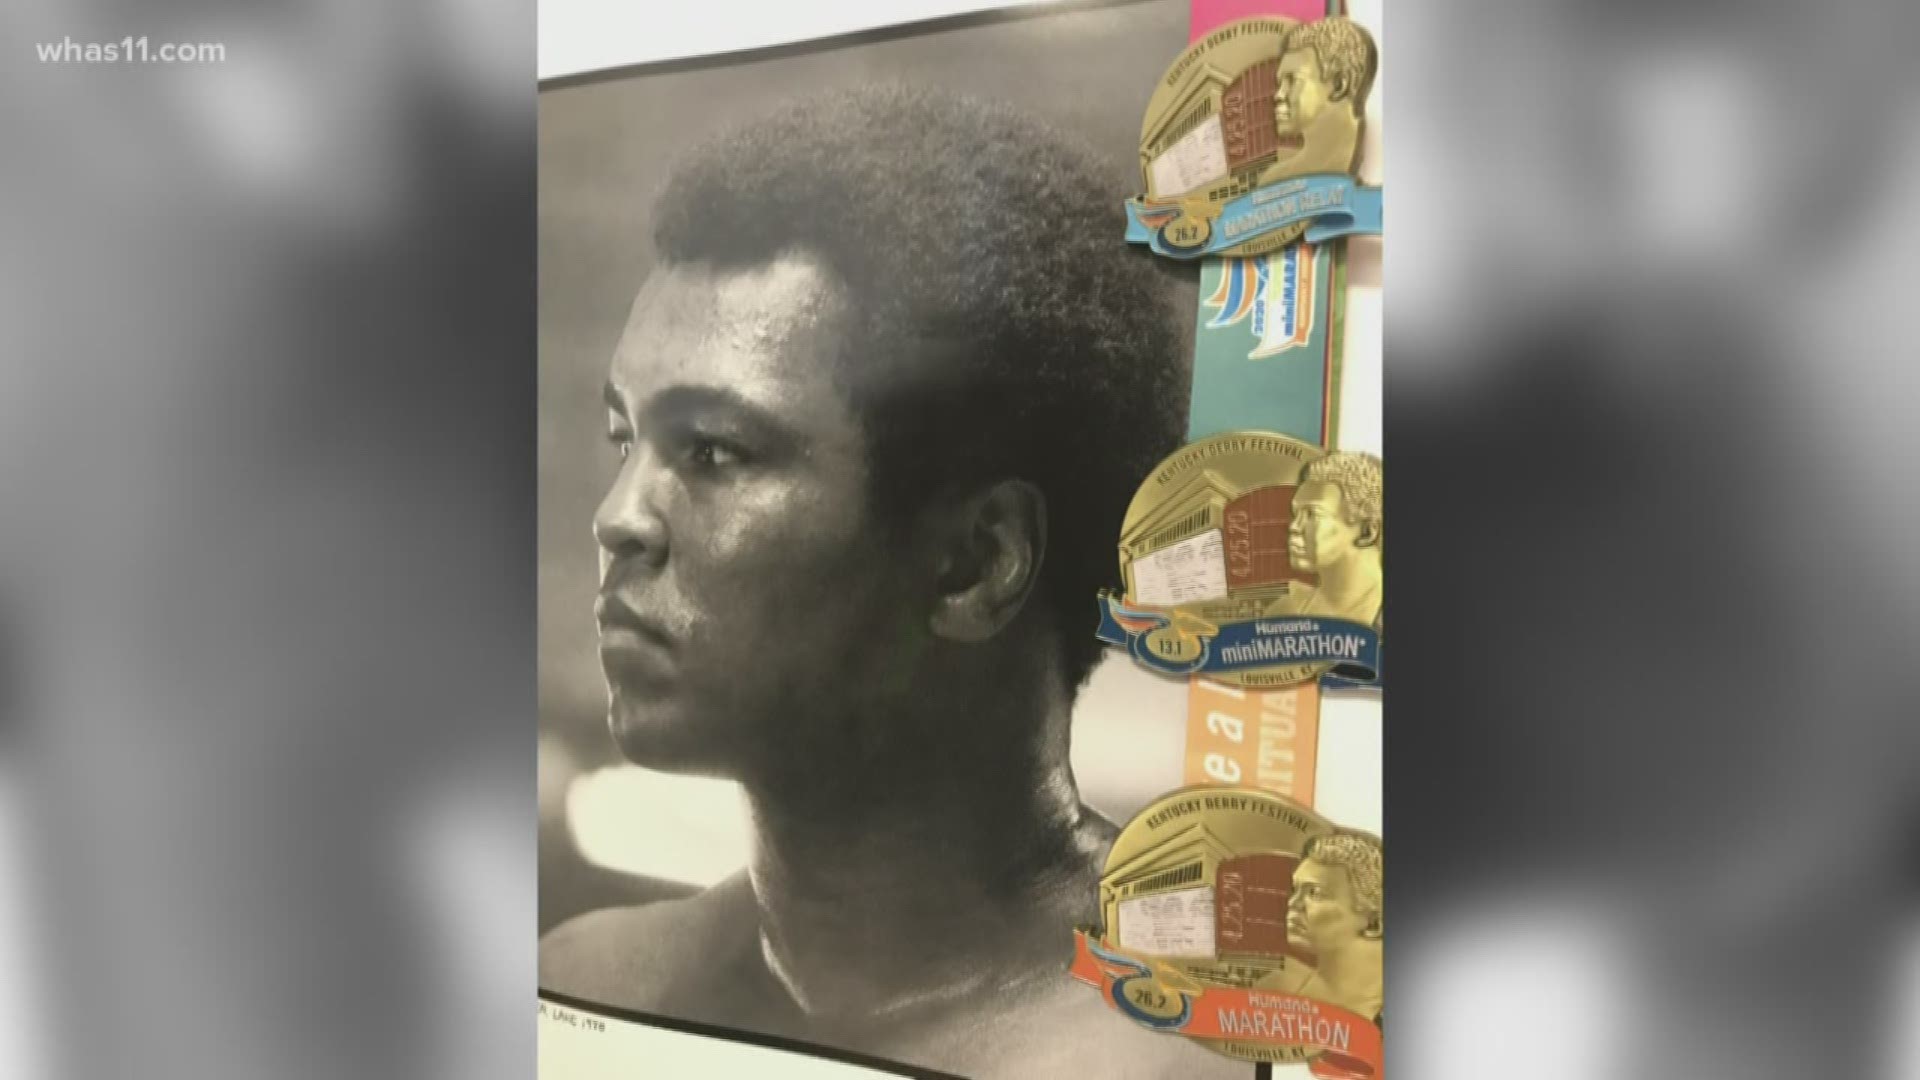 The medals feature 'The Greatest' Muhammad Ali along with the Muhammad Ali Center.